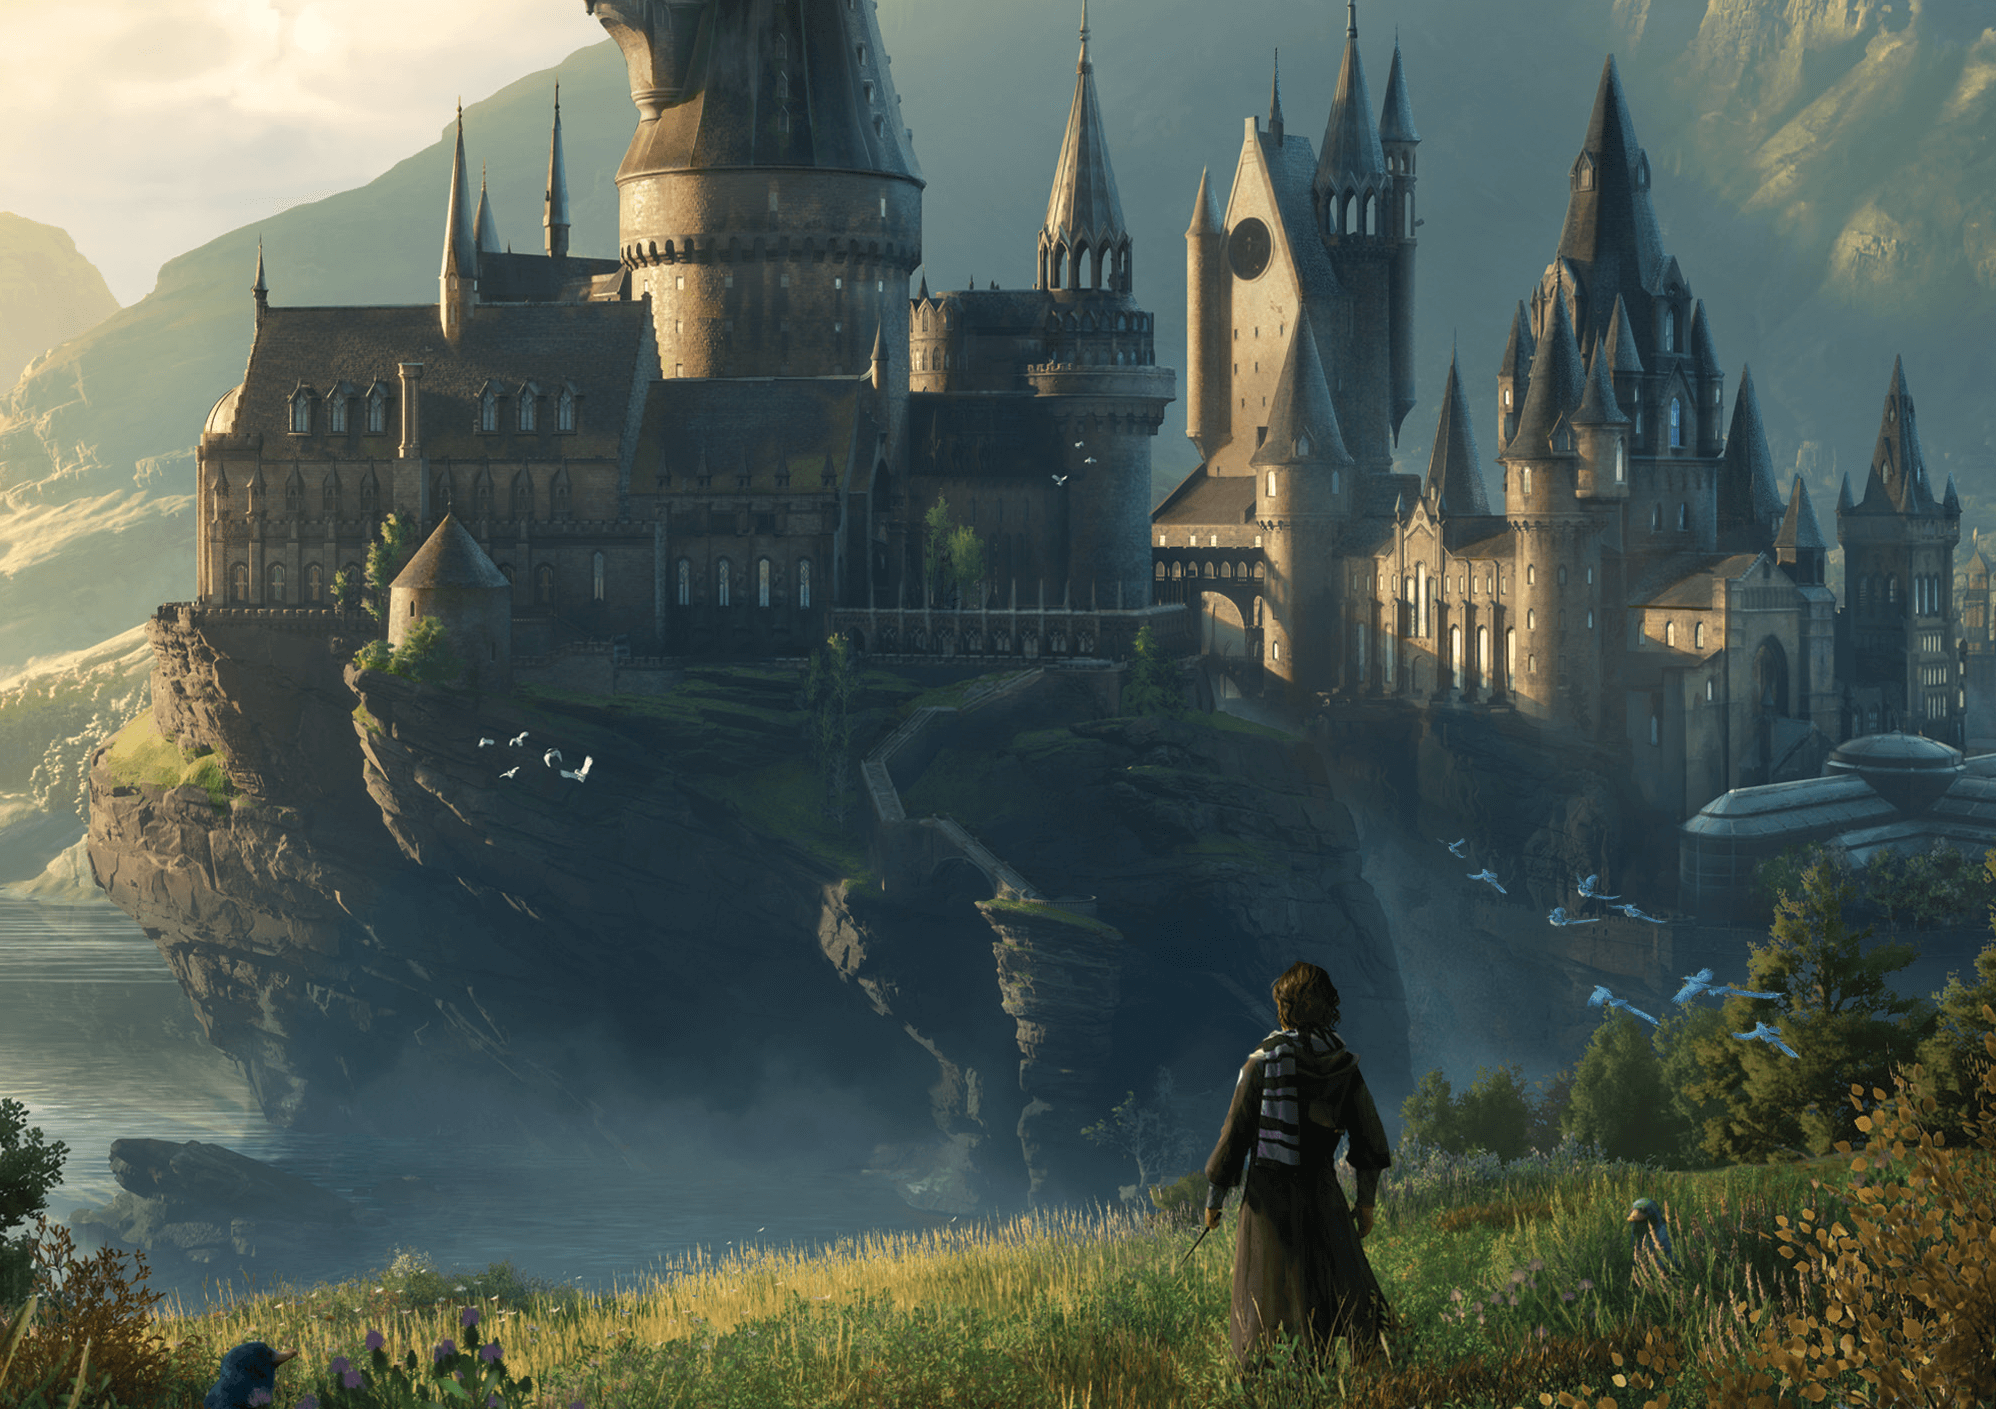 Hogwarts Legacy fans need to try this stunning free Steam download